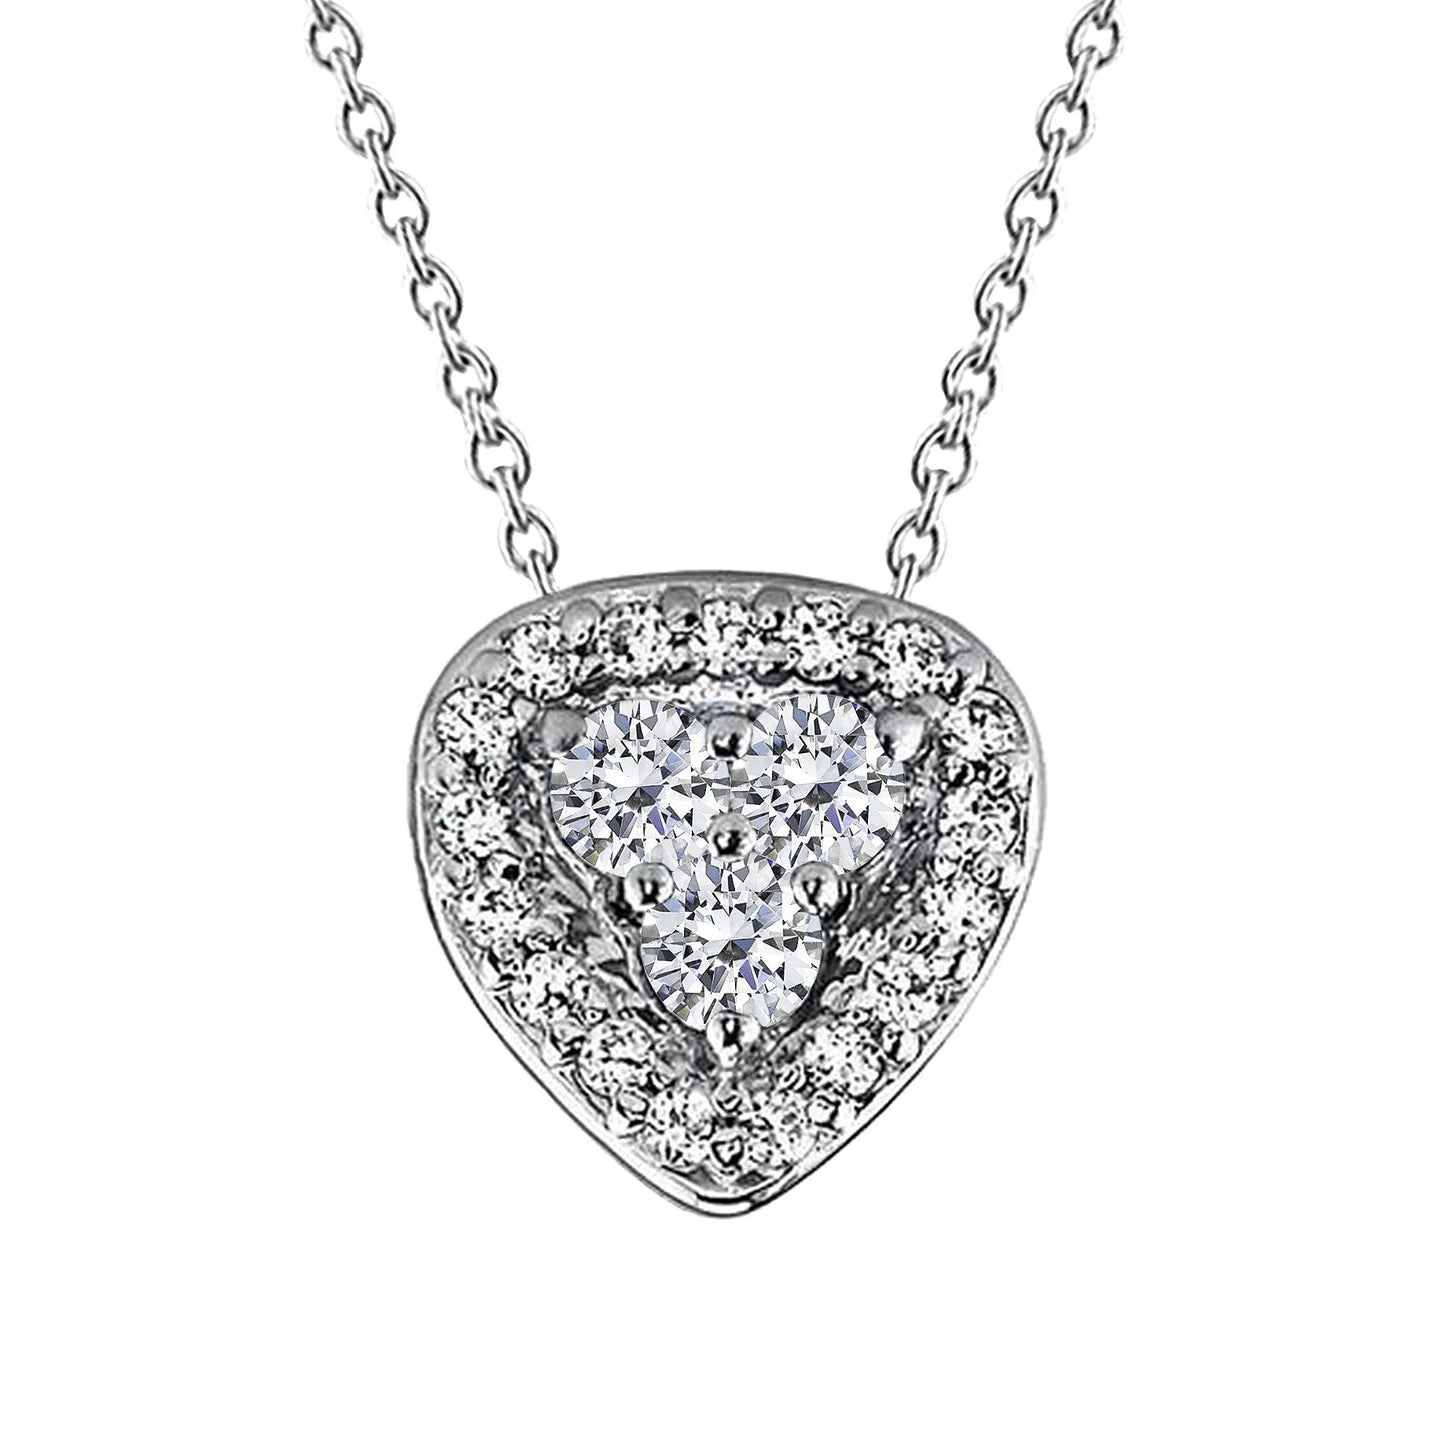 4.70 Carats Sparkling Real Diamonds Pendant Necklace With Chain Gold 14K